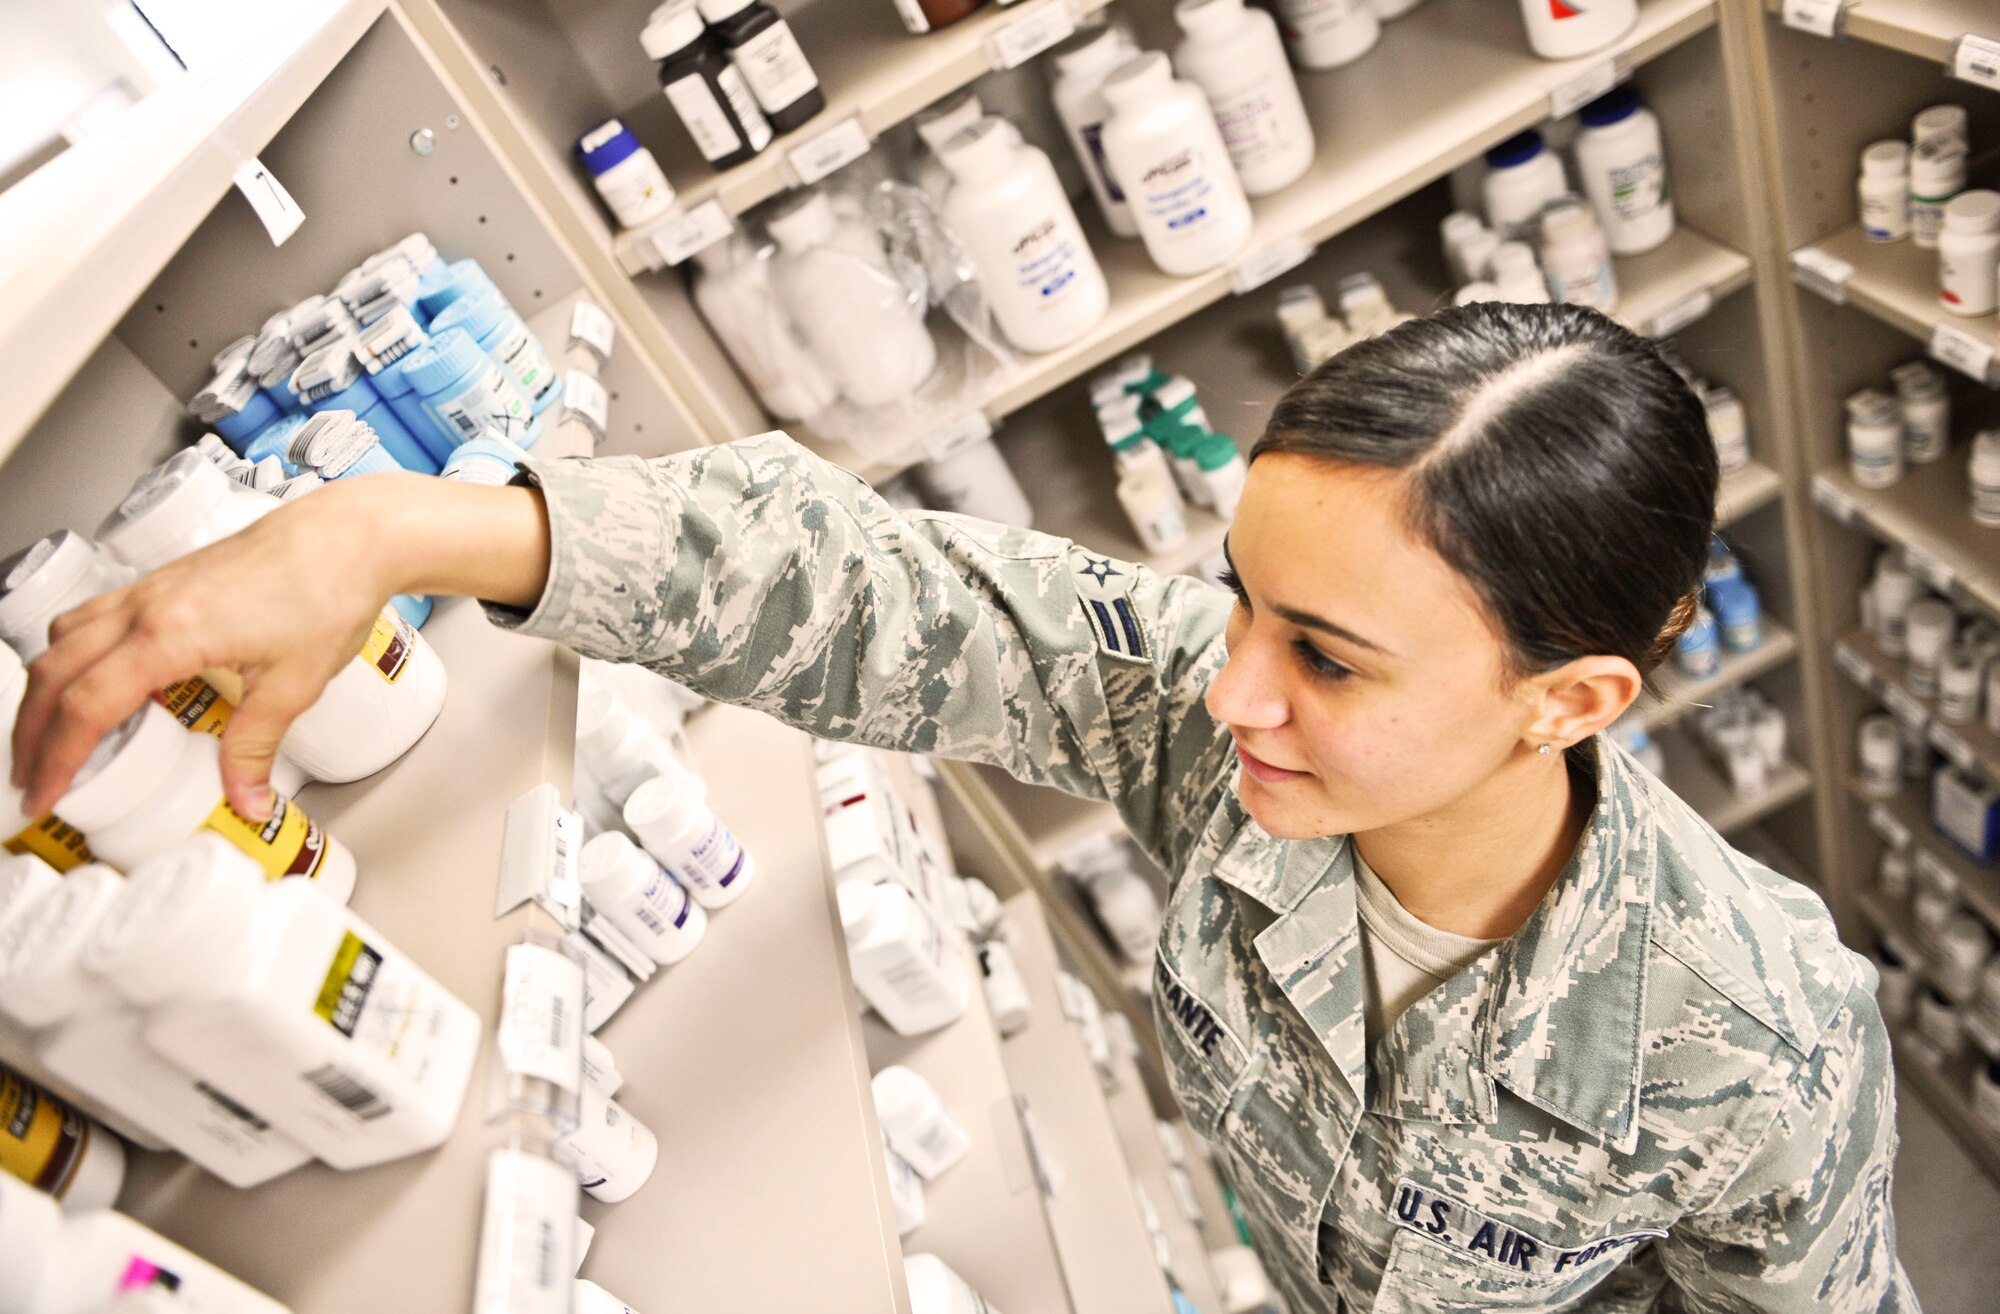 U.S. Air Force Airman 1st Class Julianna Ferrante, 7th Medical Support Squadron pharmacy technician, reaches for a prescription at the Dyess pharmacy, Oct. 22, 2013, at Dyess Air Force Base, Texas.  The pharmacy houses more than 1,000 different medications including eye drops, creams, ointments and insulin. (U.S. Air Force photo by Airman 1st Class Kedesha Pennant/Released)